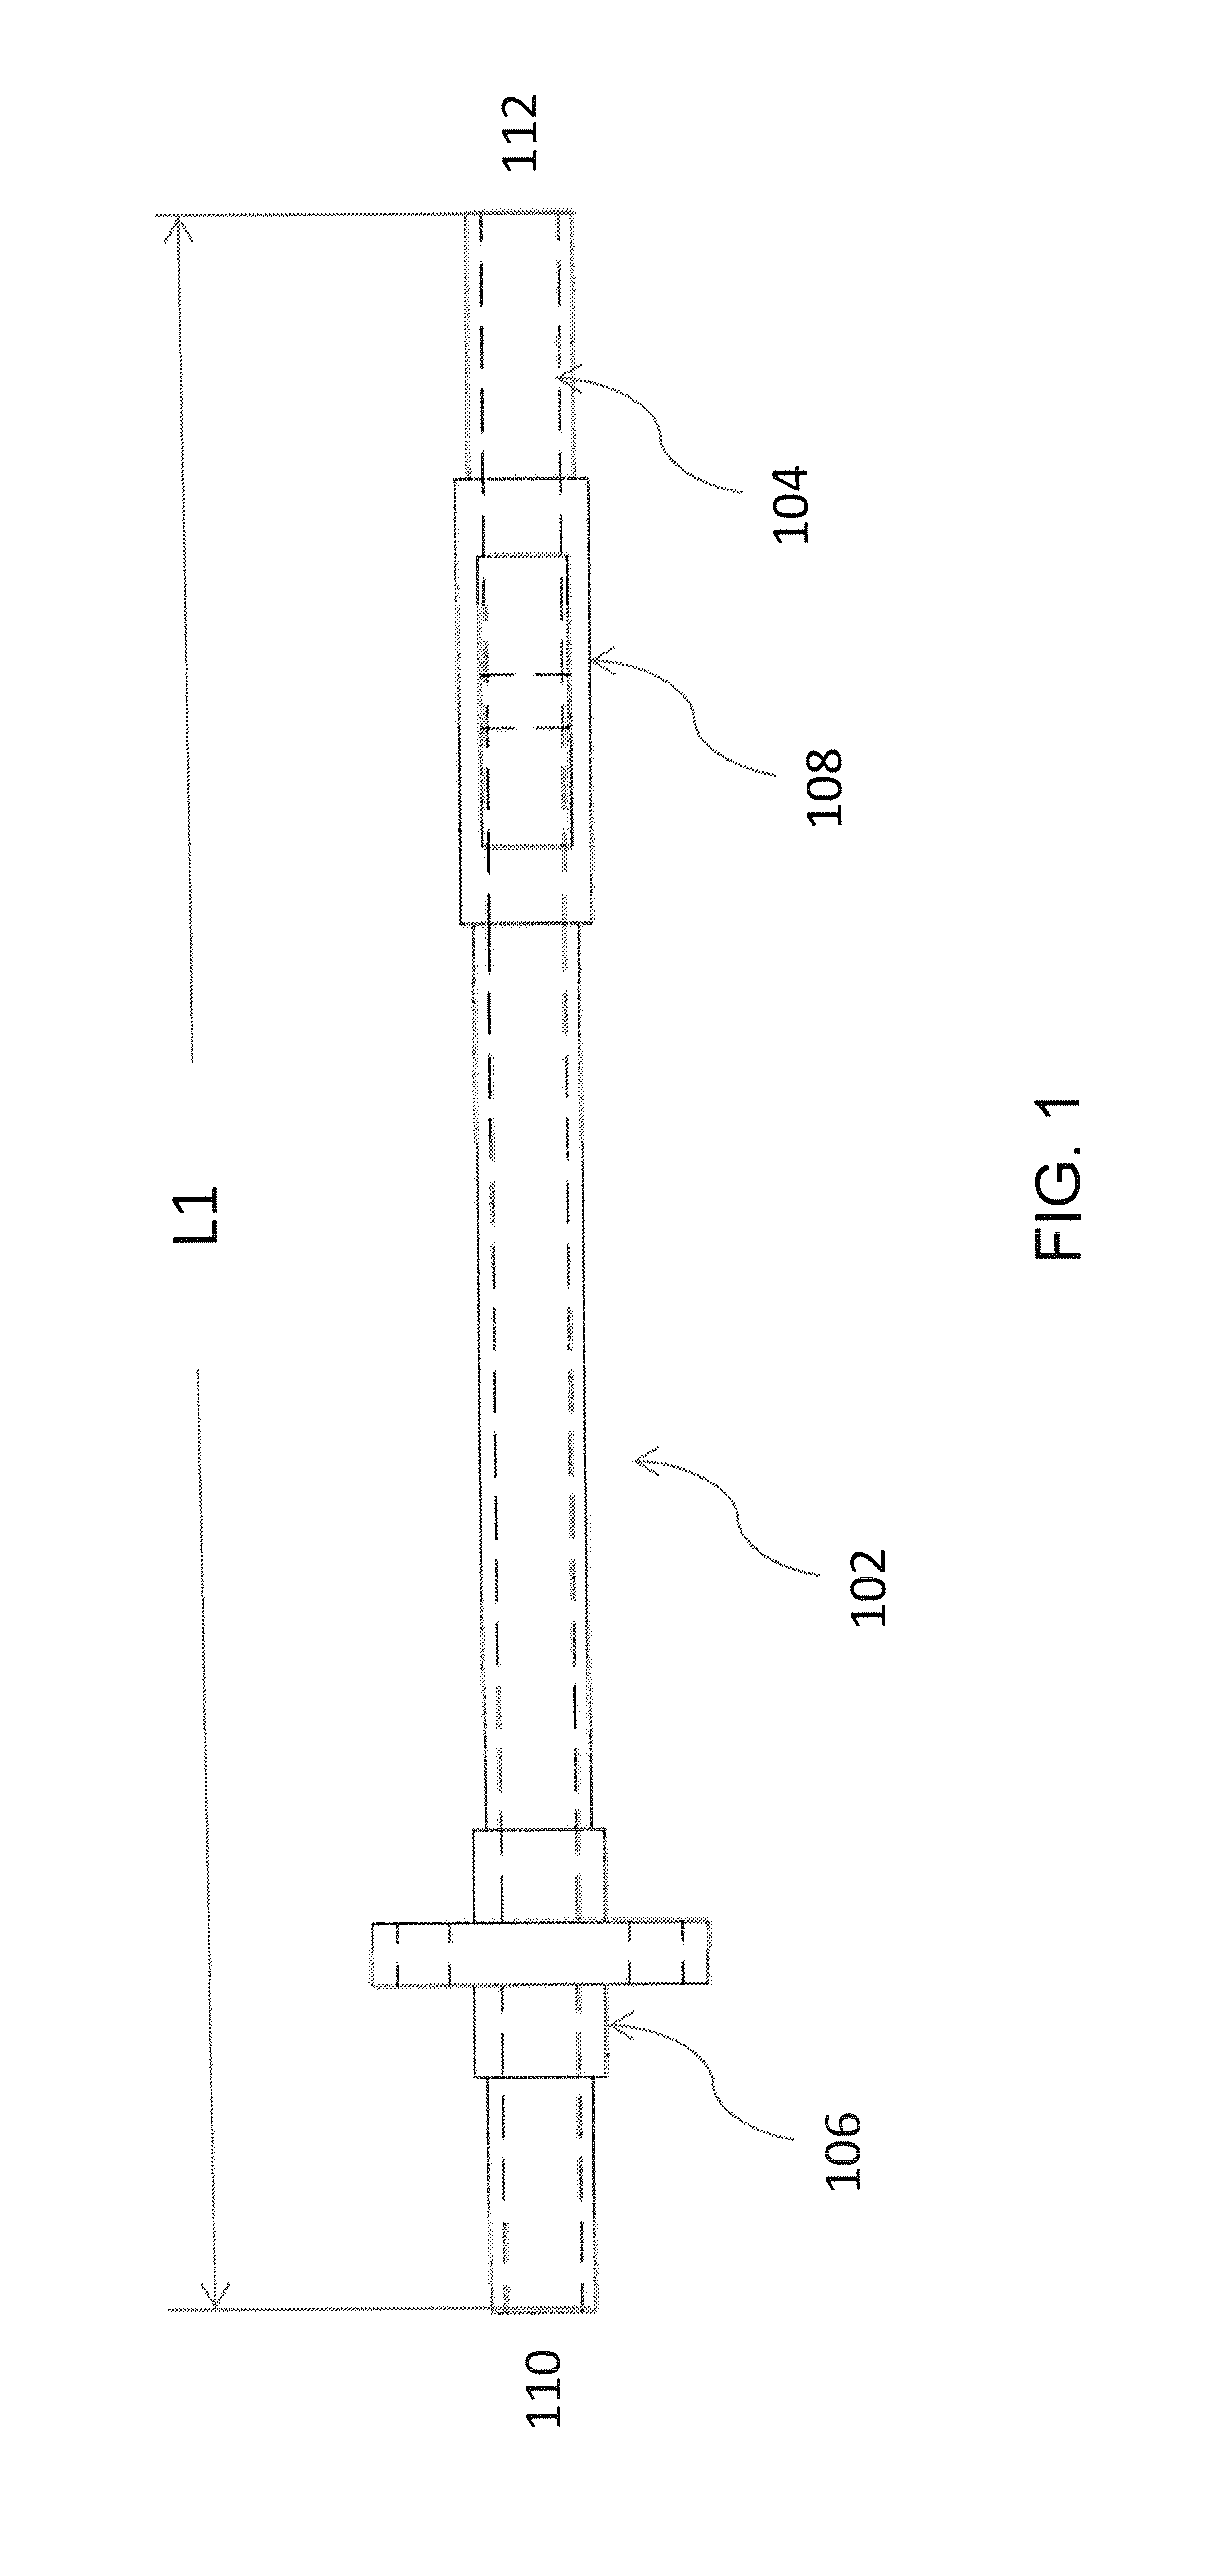 Implant Device for Use in Salivary Gland Duct